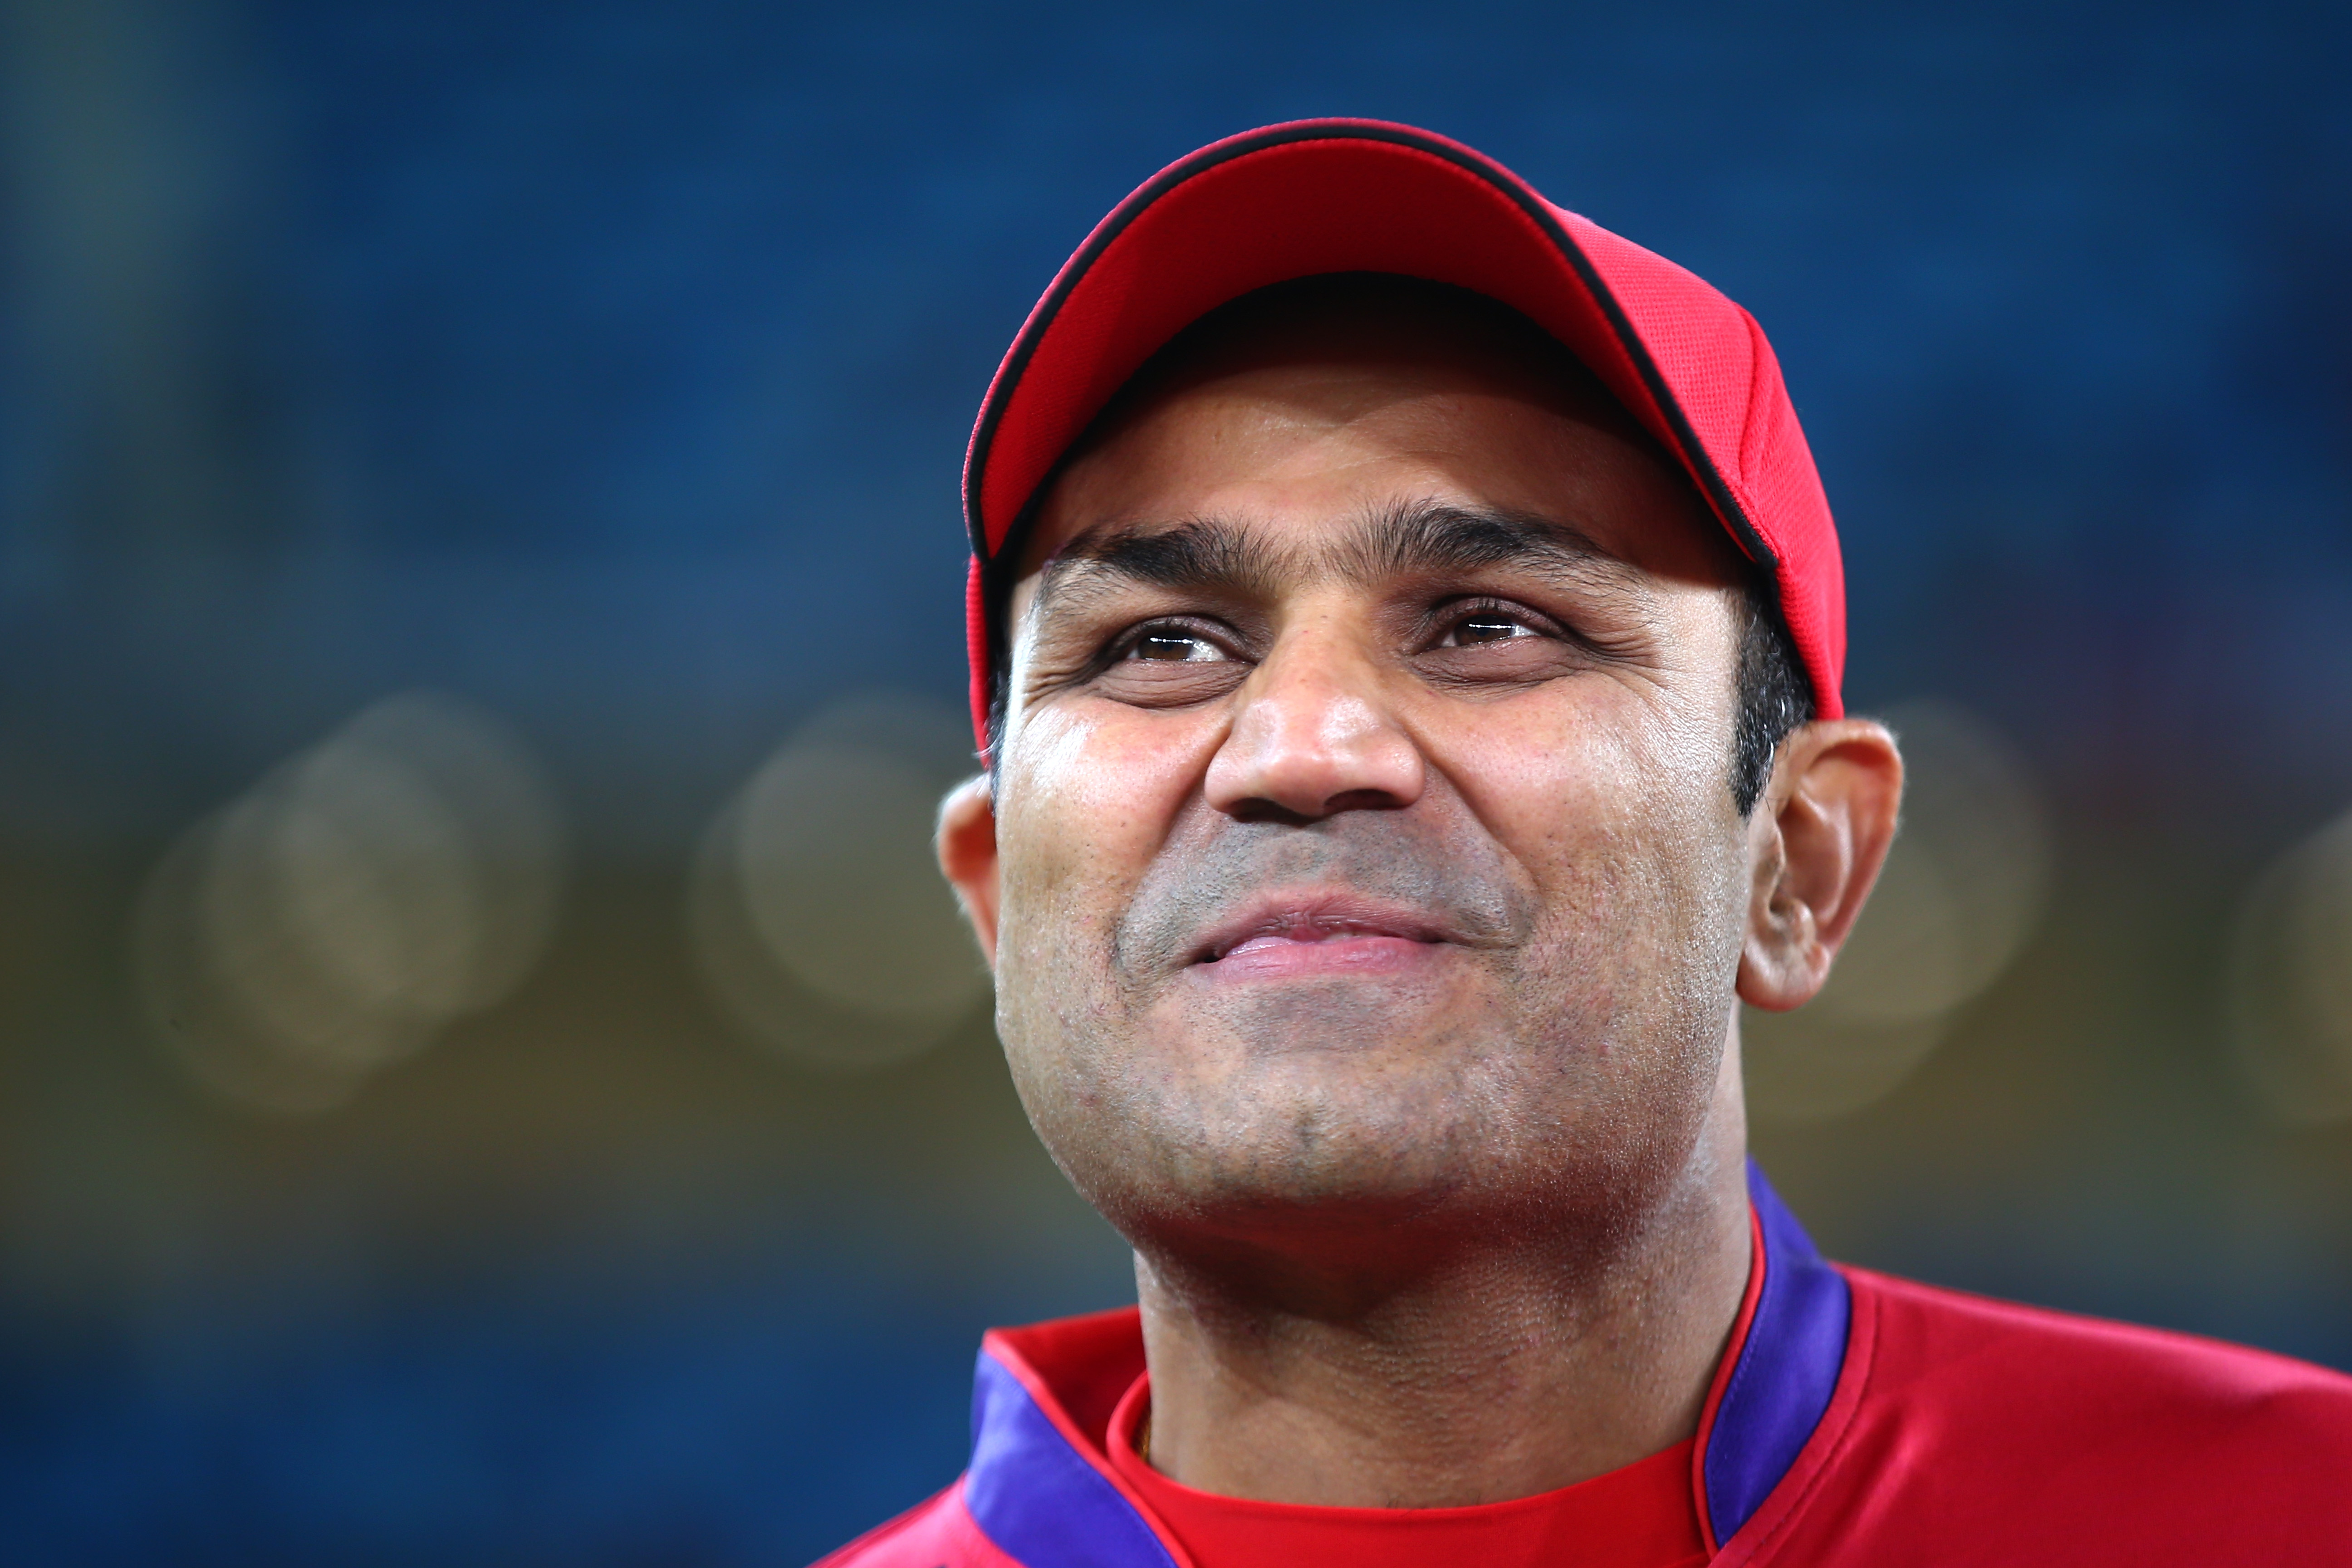 IPL 2018 | Good investment if Yuvraj and Gayle win 2-3 games, claims Virender Sehwag